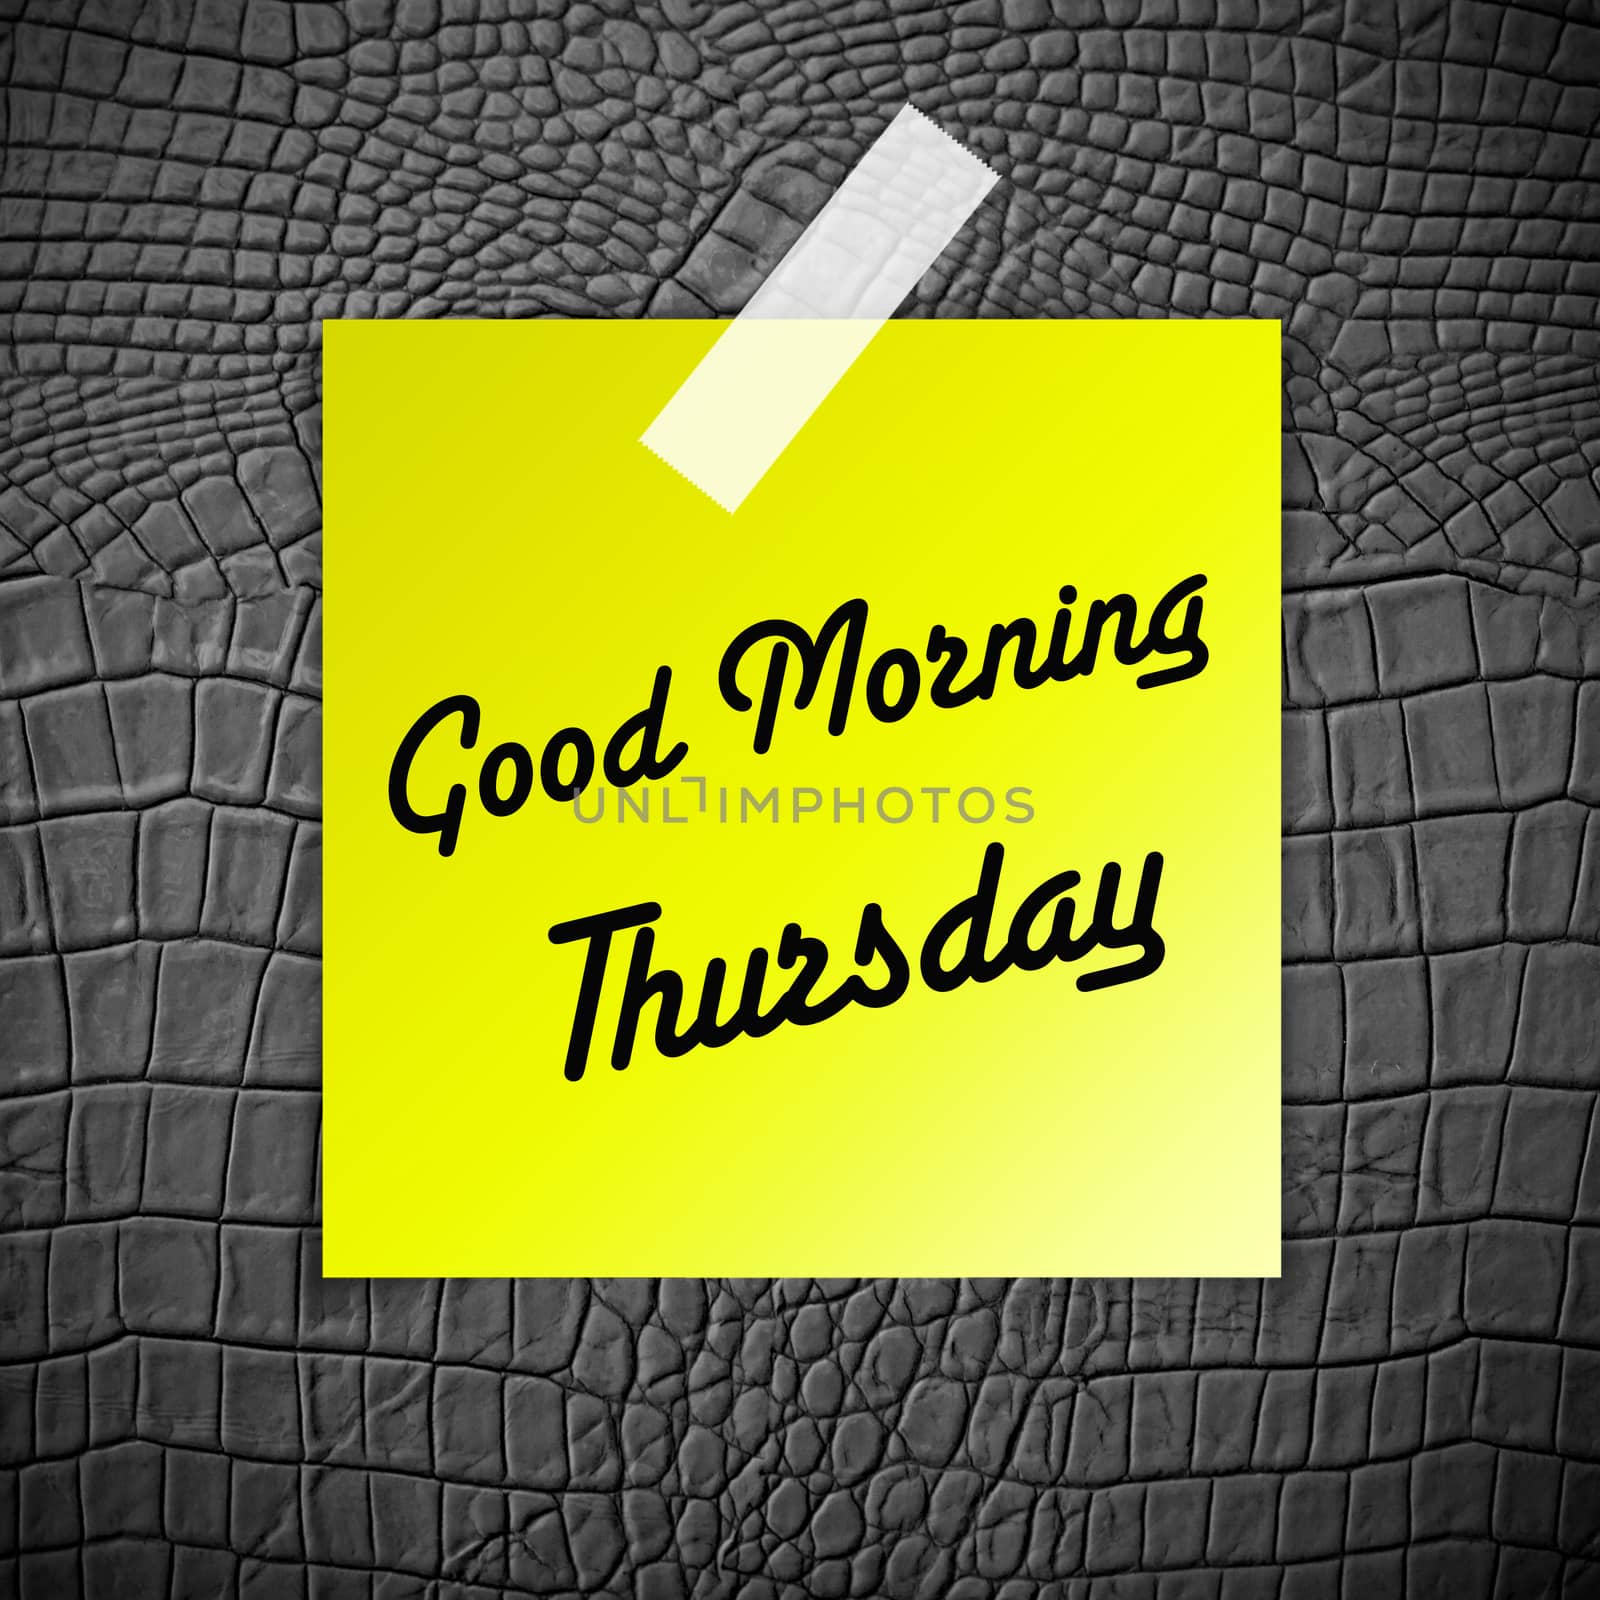 Good morning Thursday working day on Grey Leather texture background